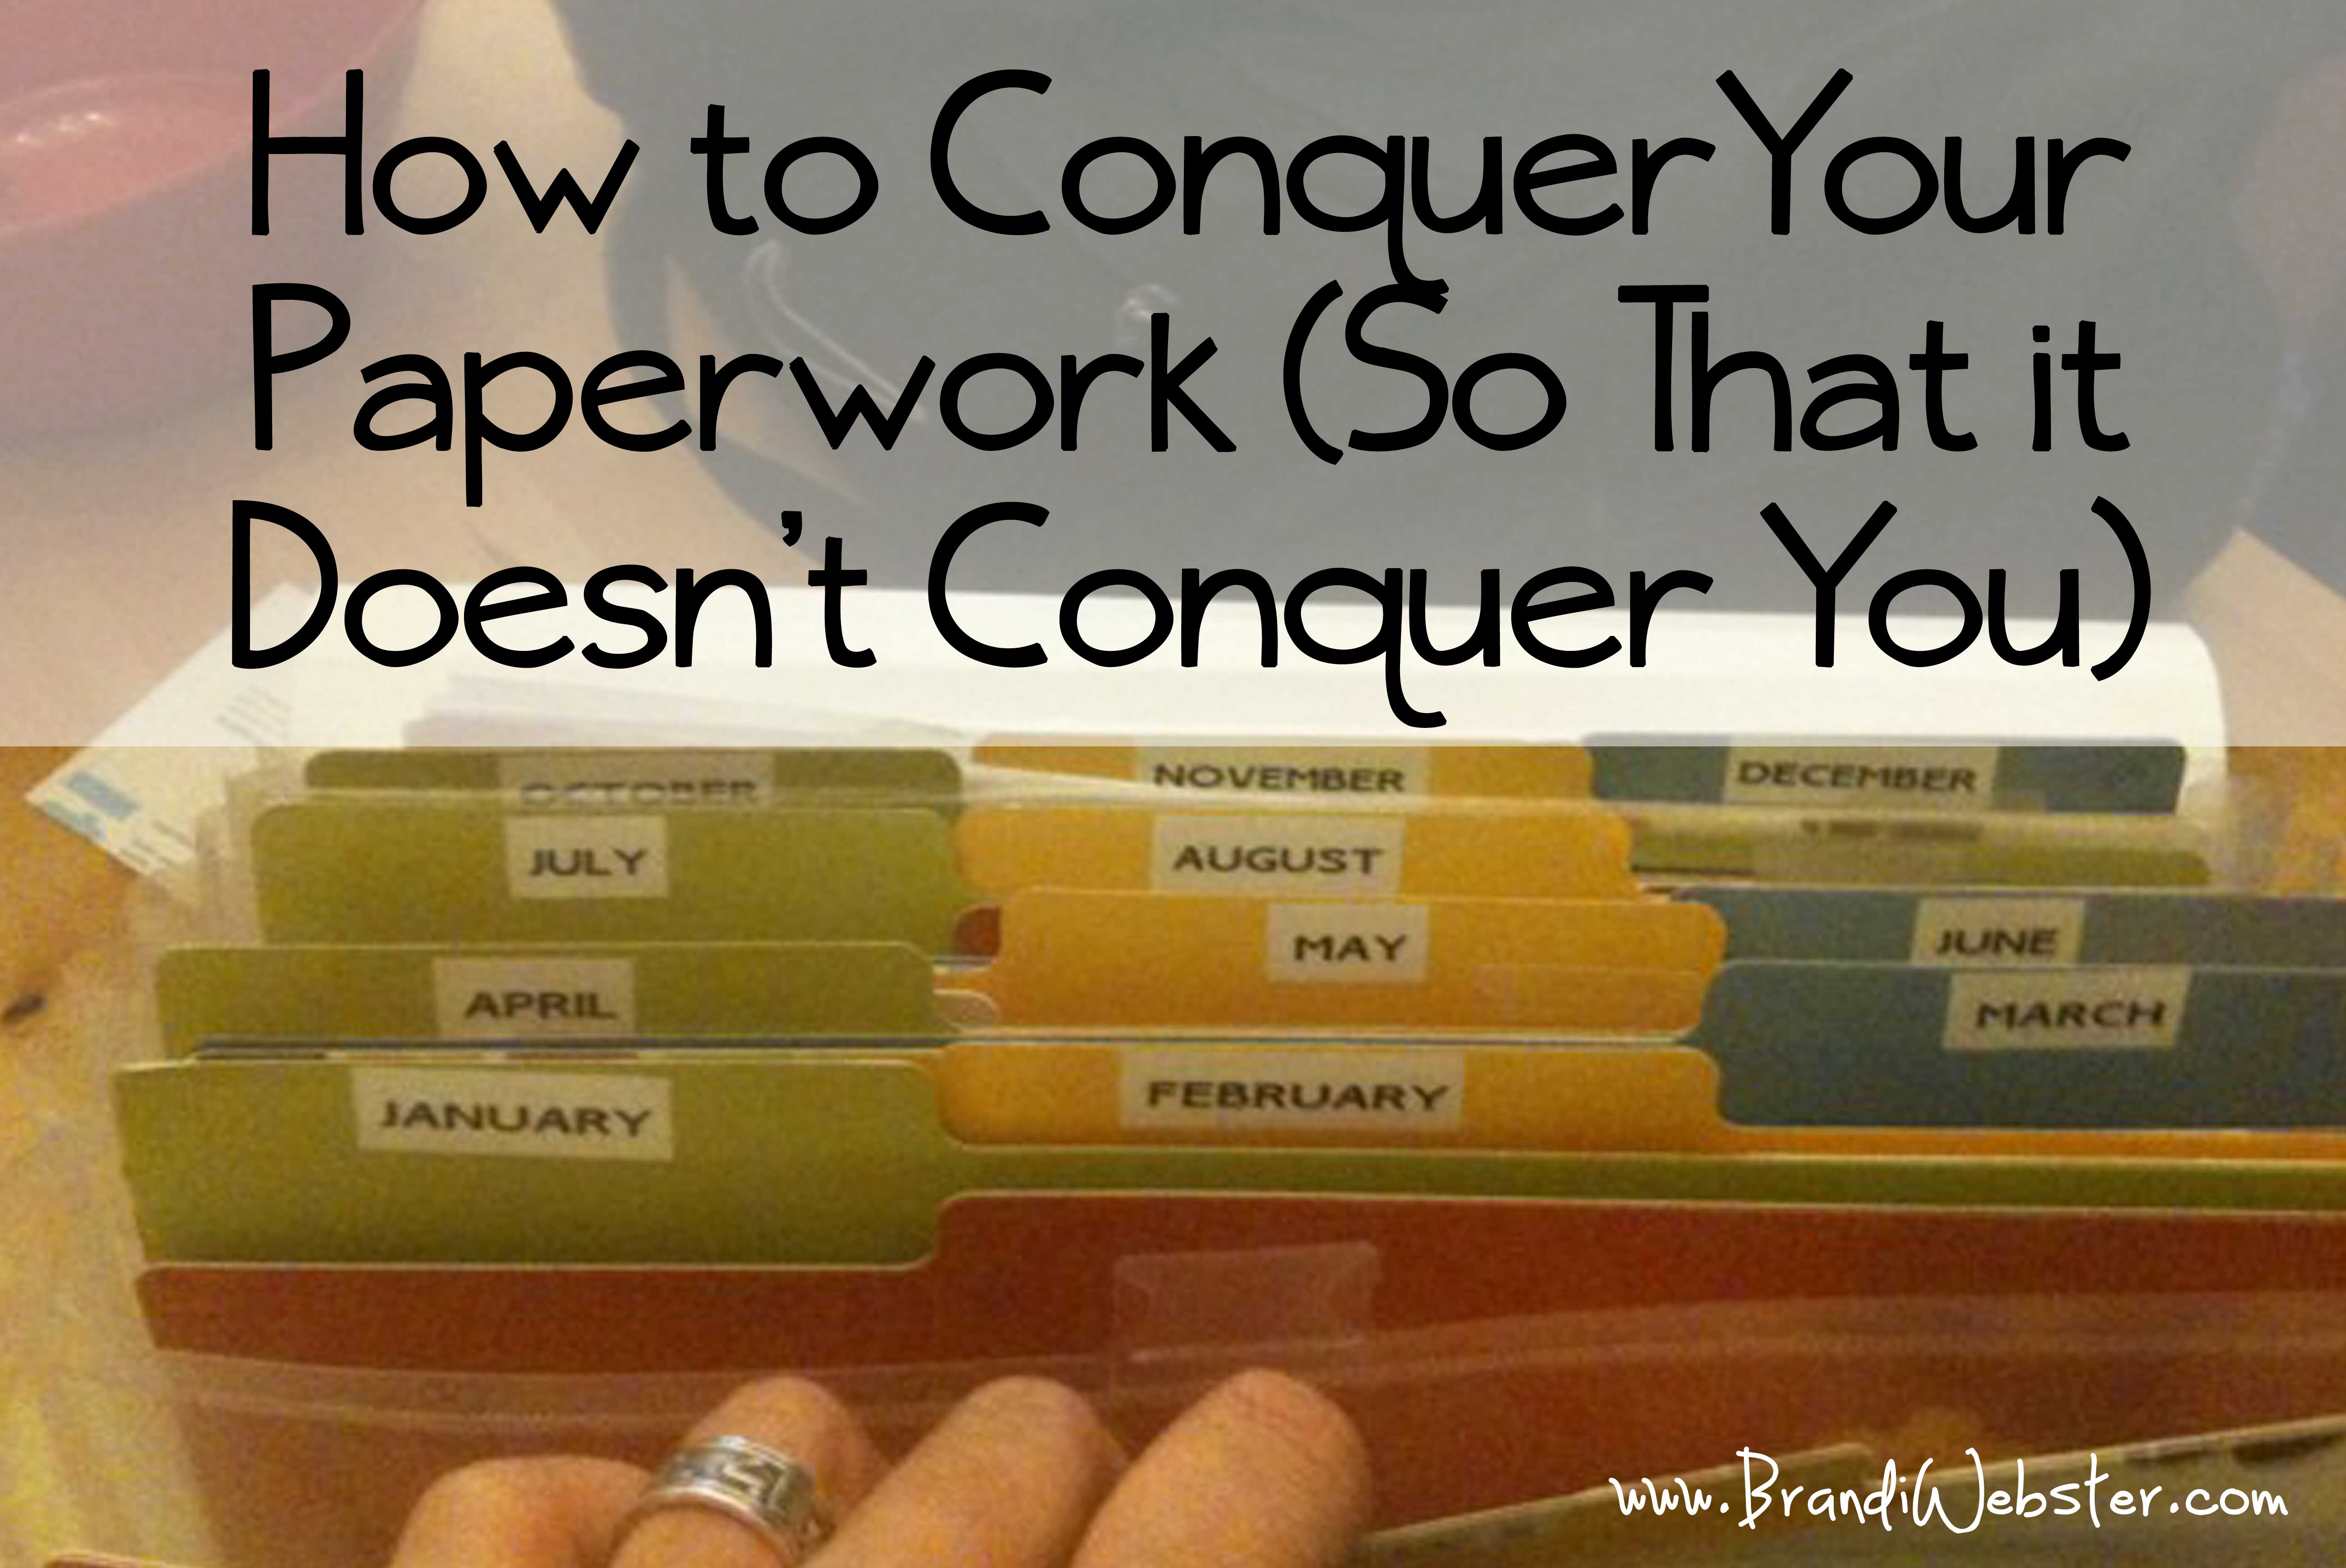 How to Conquer Your Paperwork...